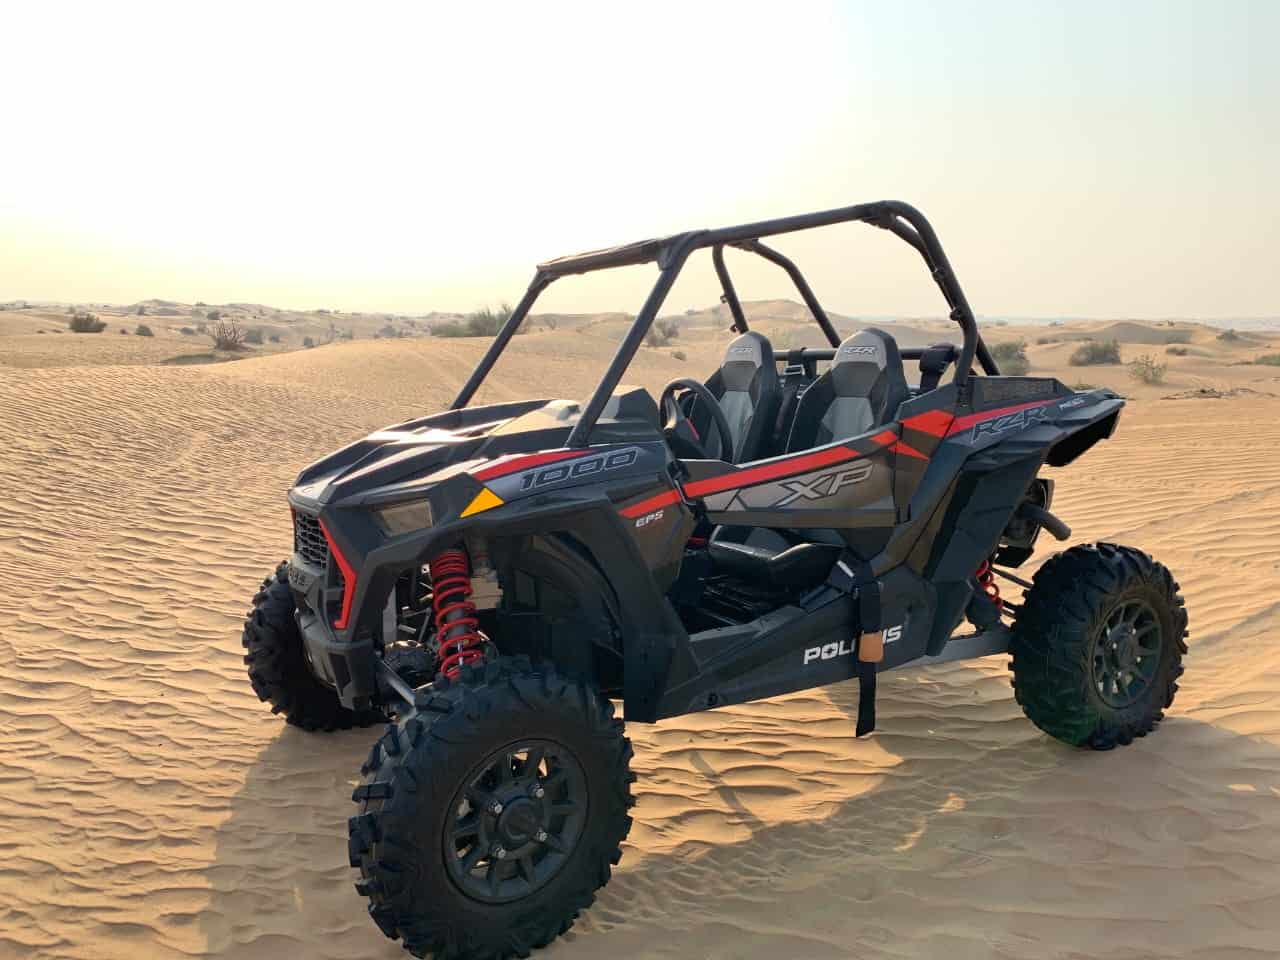 Daily Dune Buggy Rental Service